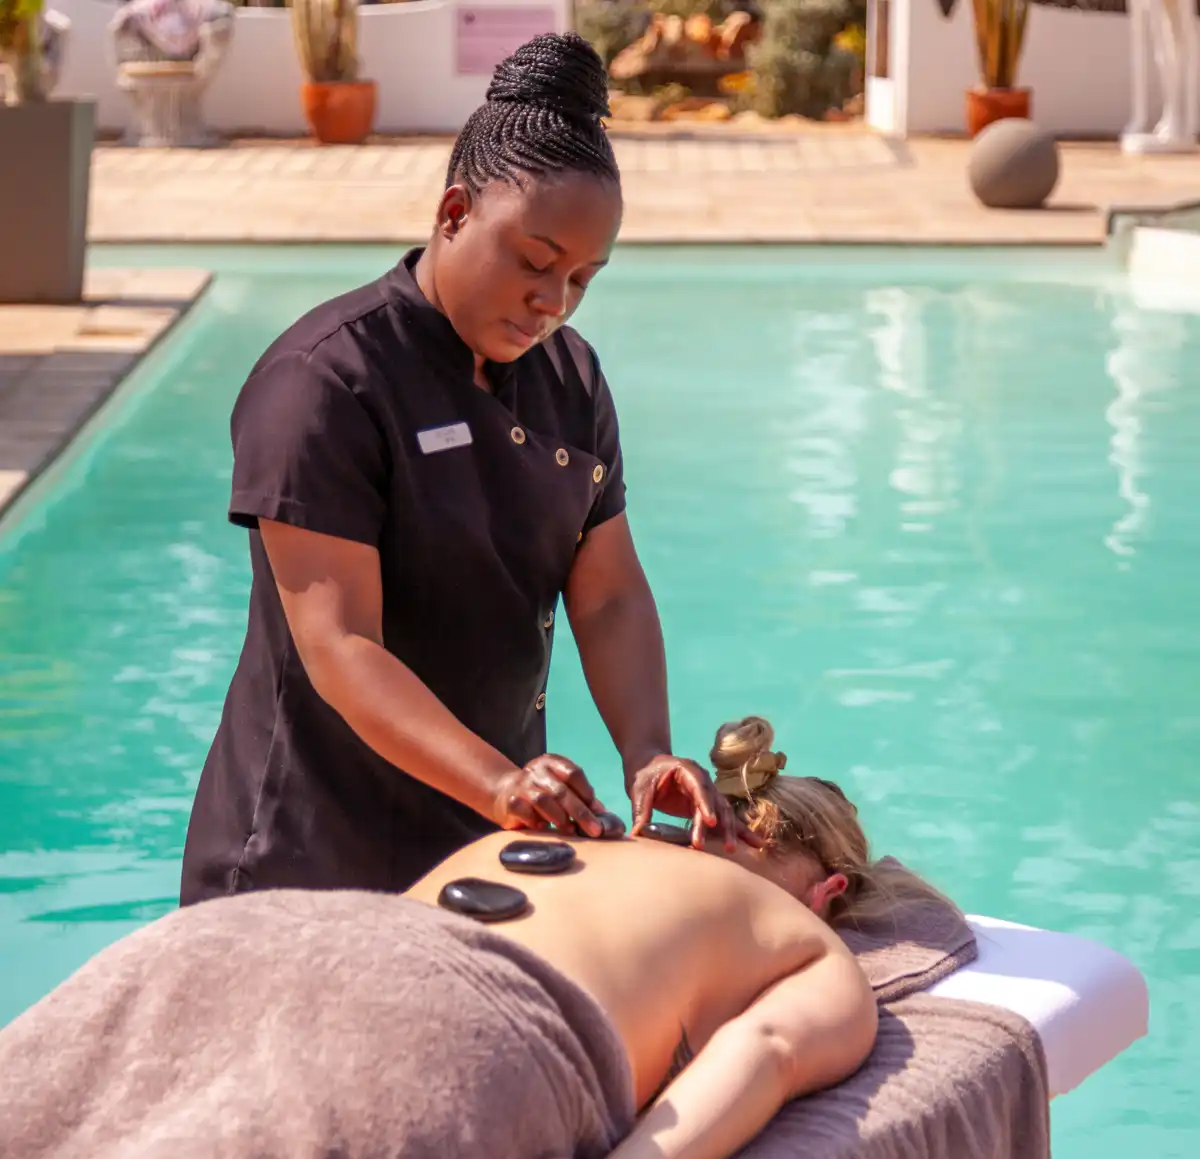 Winter Safari Add-On Activities at Inverdoorn: Poolside spa treatments and African hot stone massage